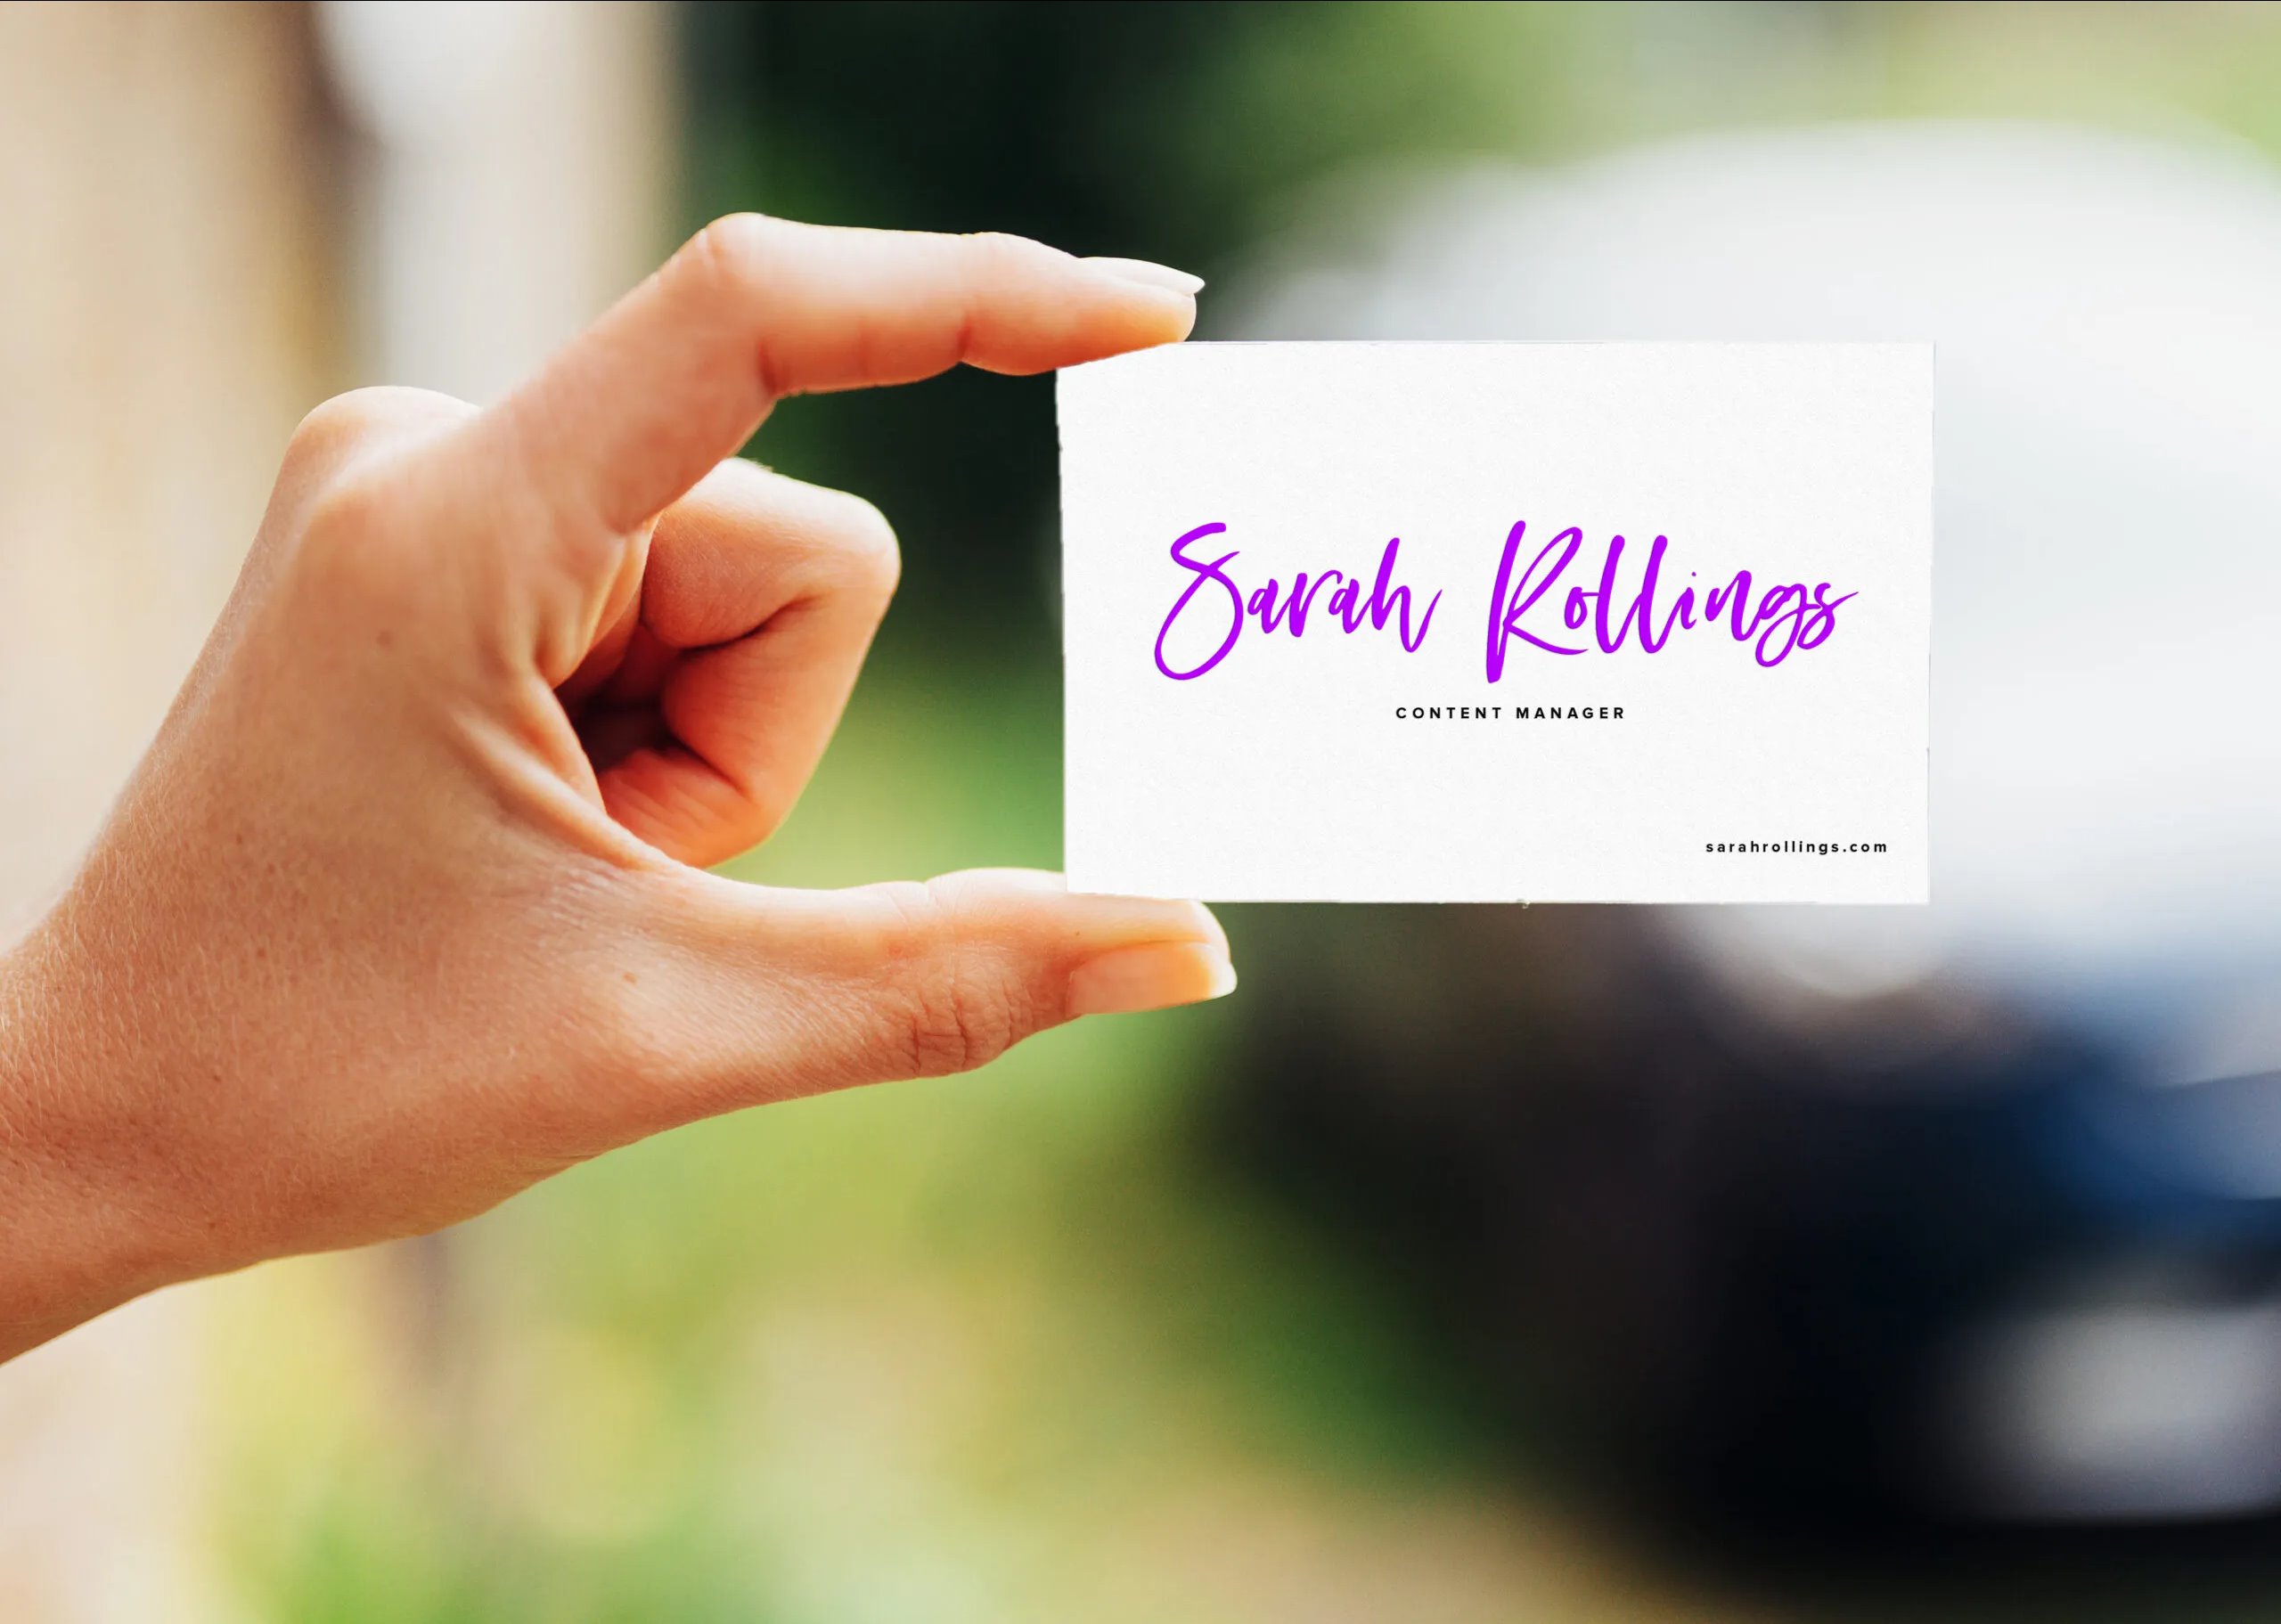 4 Hand Holding Business Card Mockups in Front Views FREE PSD